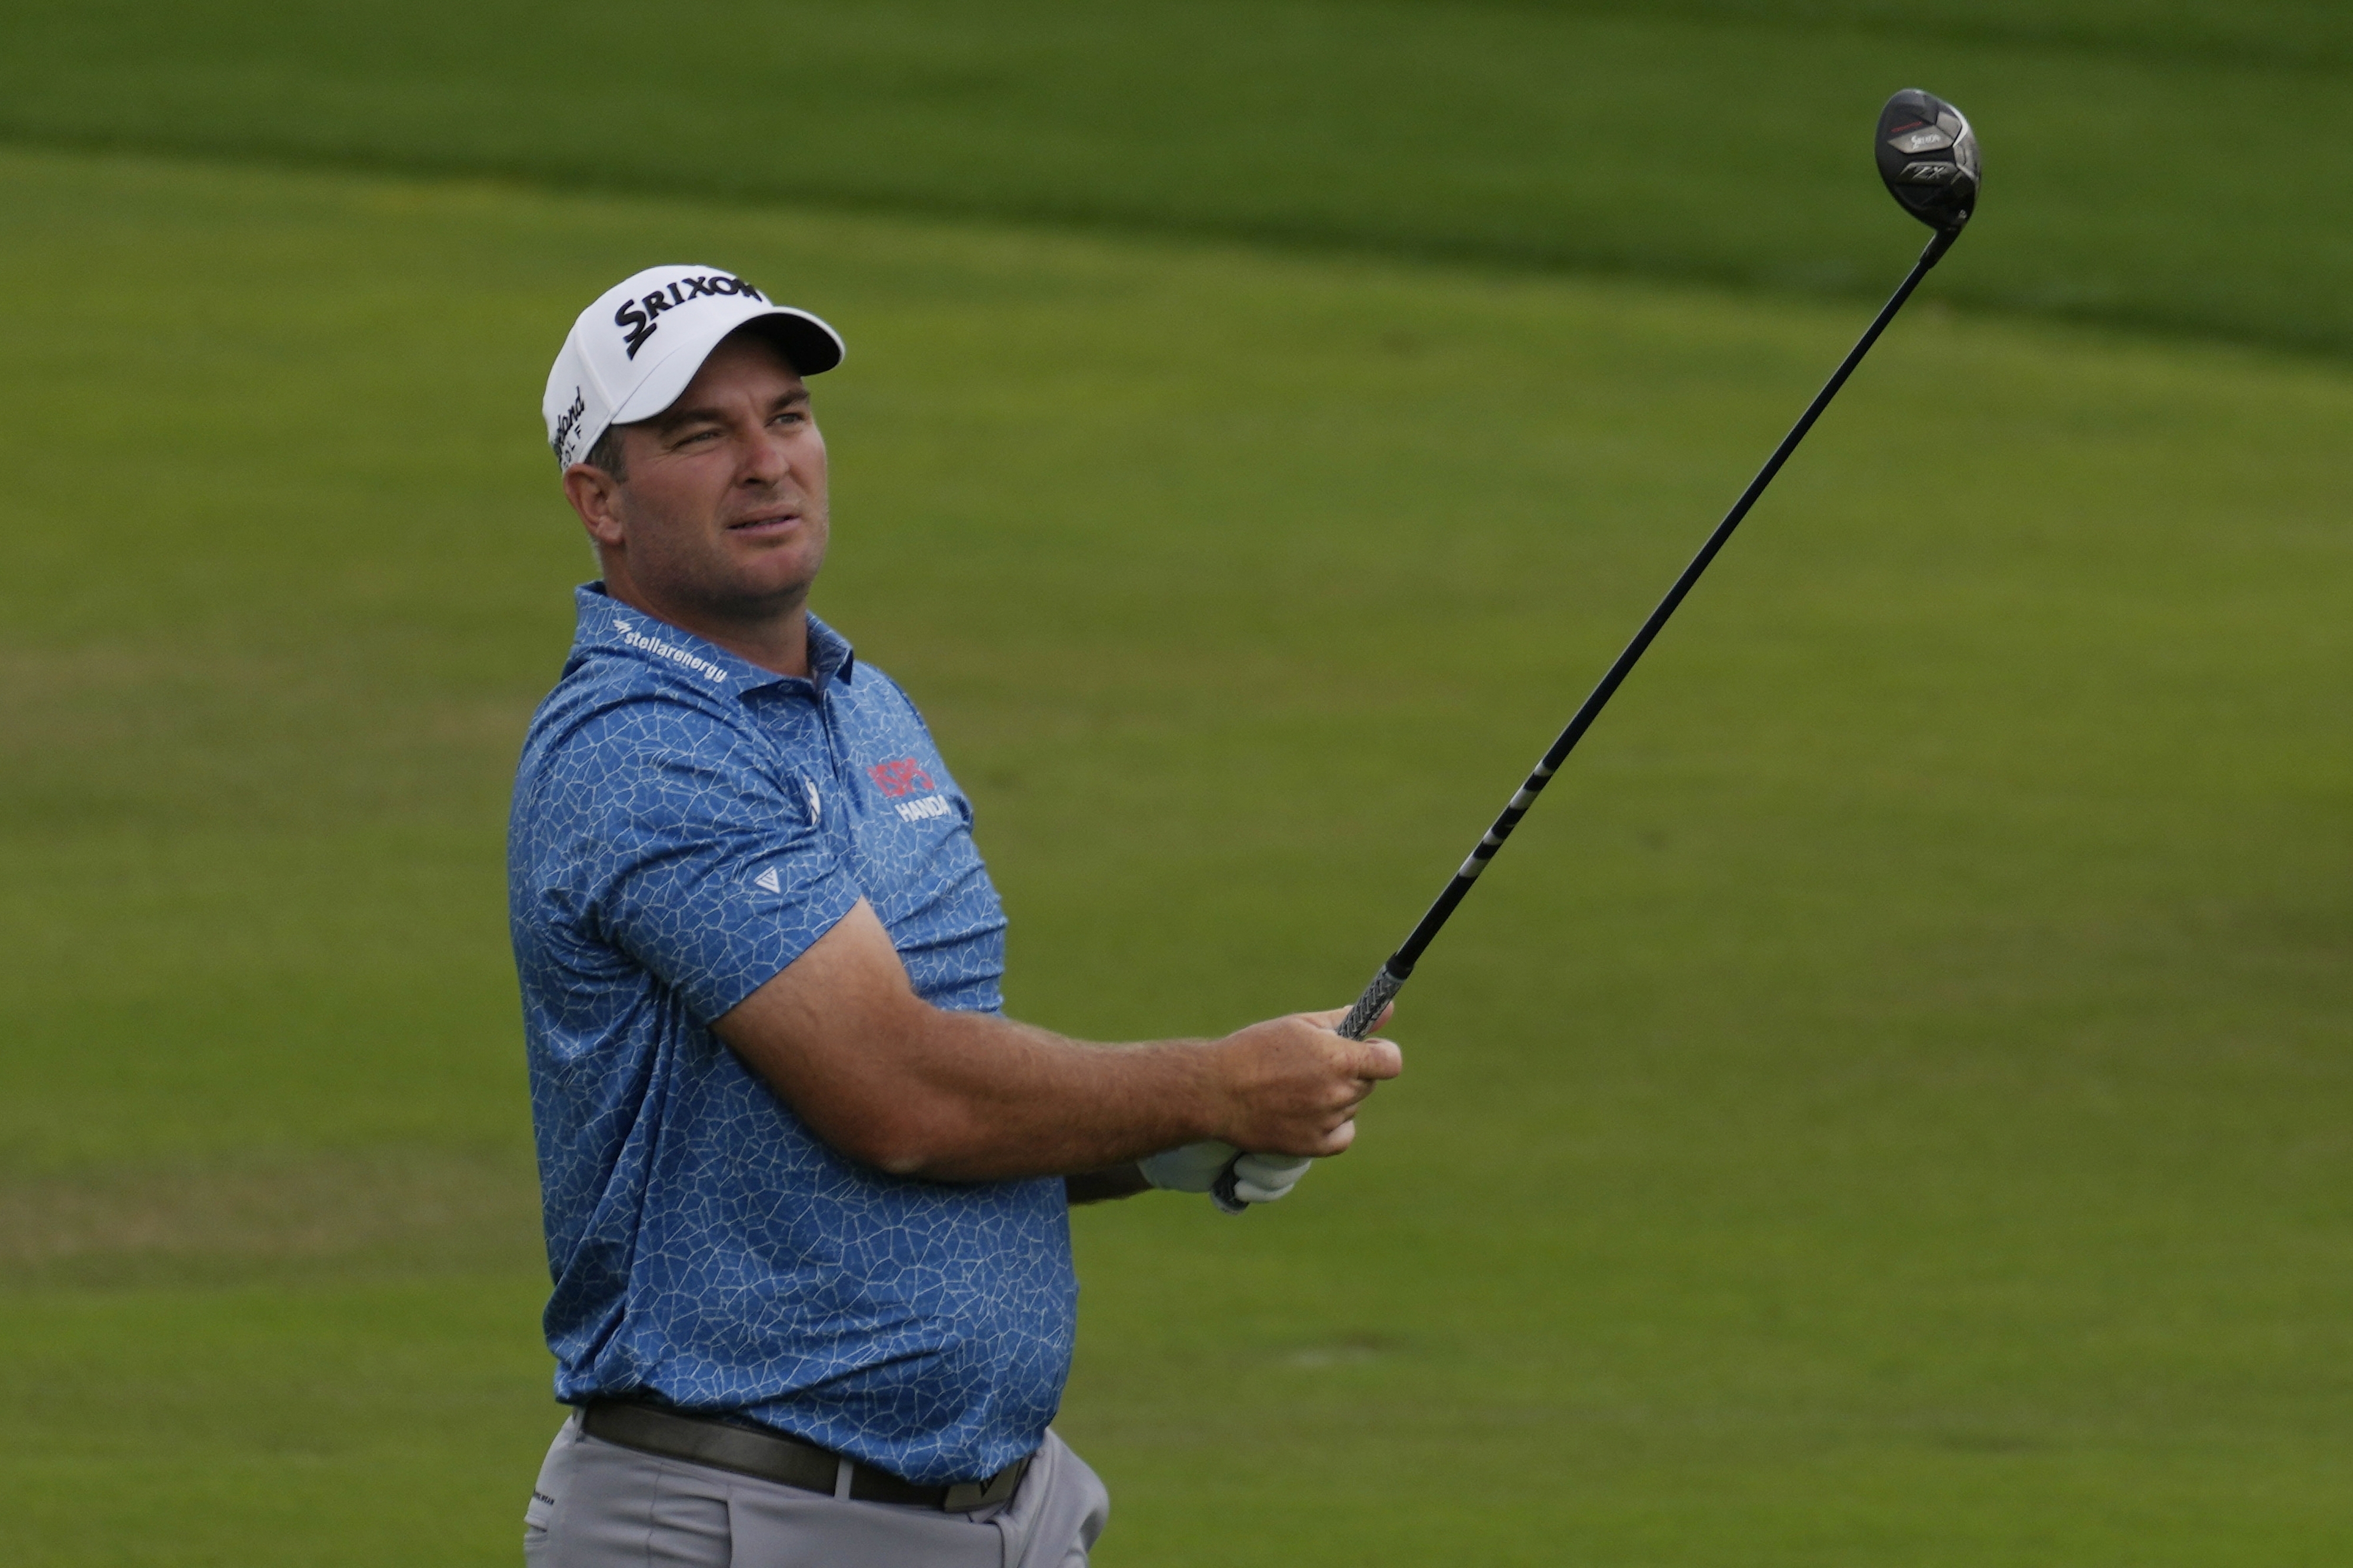 Golf: Ryan Fox makes solid start as Patrick Reed fares better than Rory  McIlroy in wet first day at Dubai Desert Classic - NZ Herald